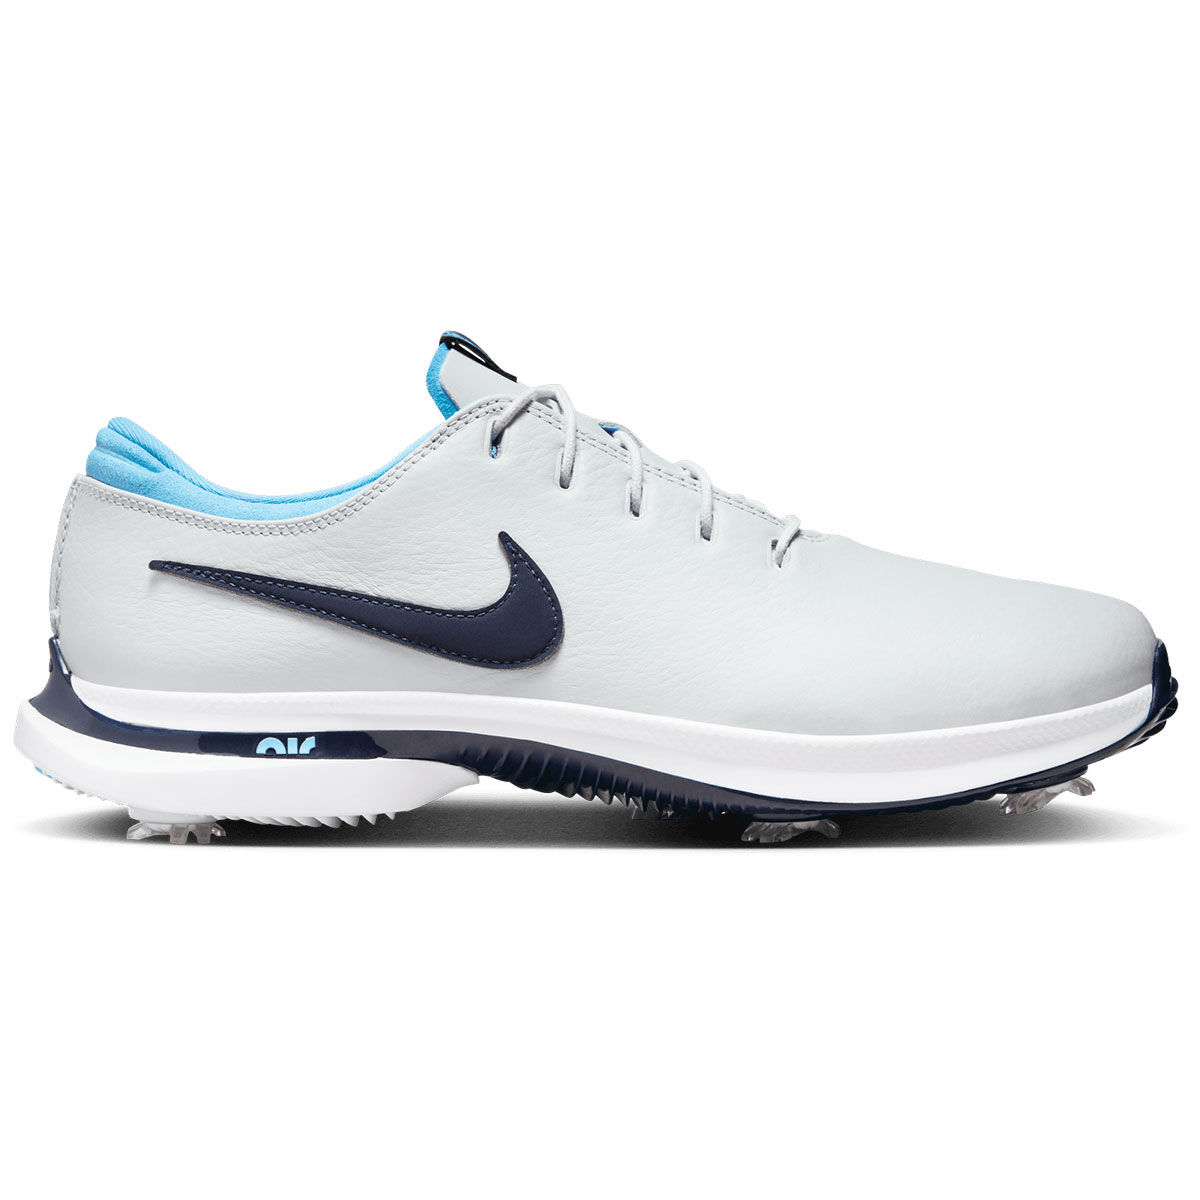 Nike Air Zoom Victory Tour 3 Waterproof Spiked Golf Shoes, Mens, Pure platinum/obsidian/white, 7 | American Golf von Nike Golf